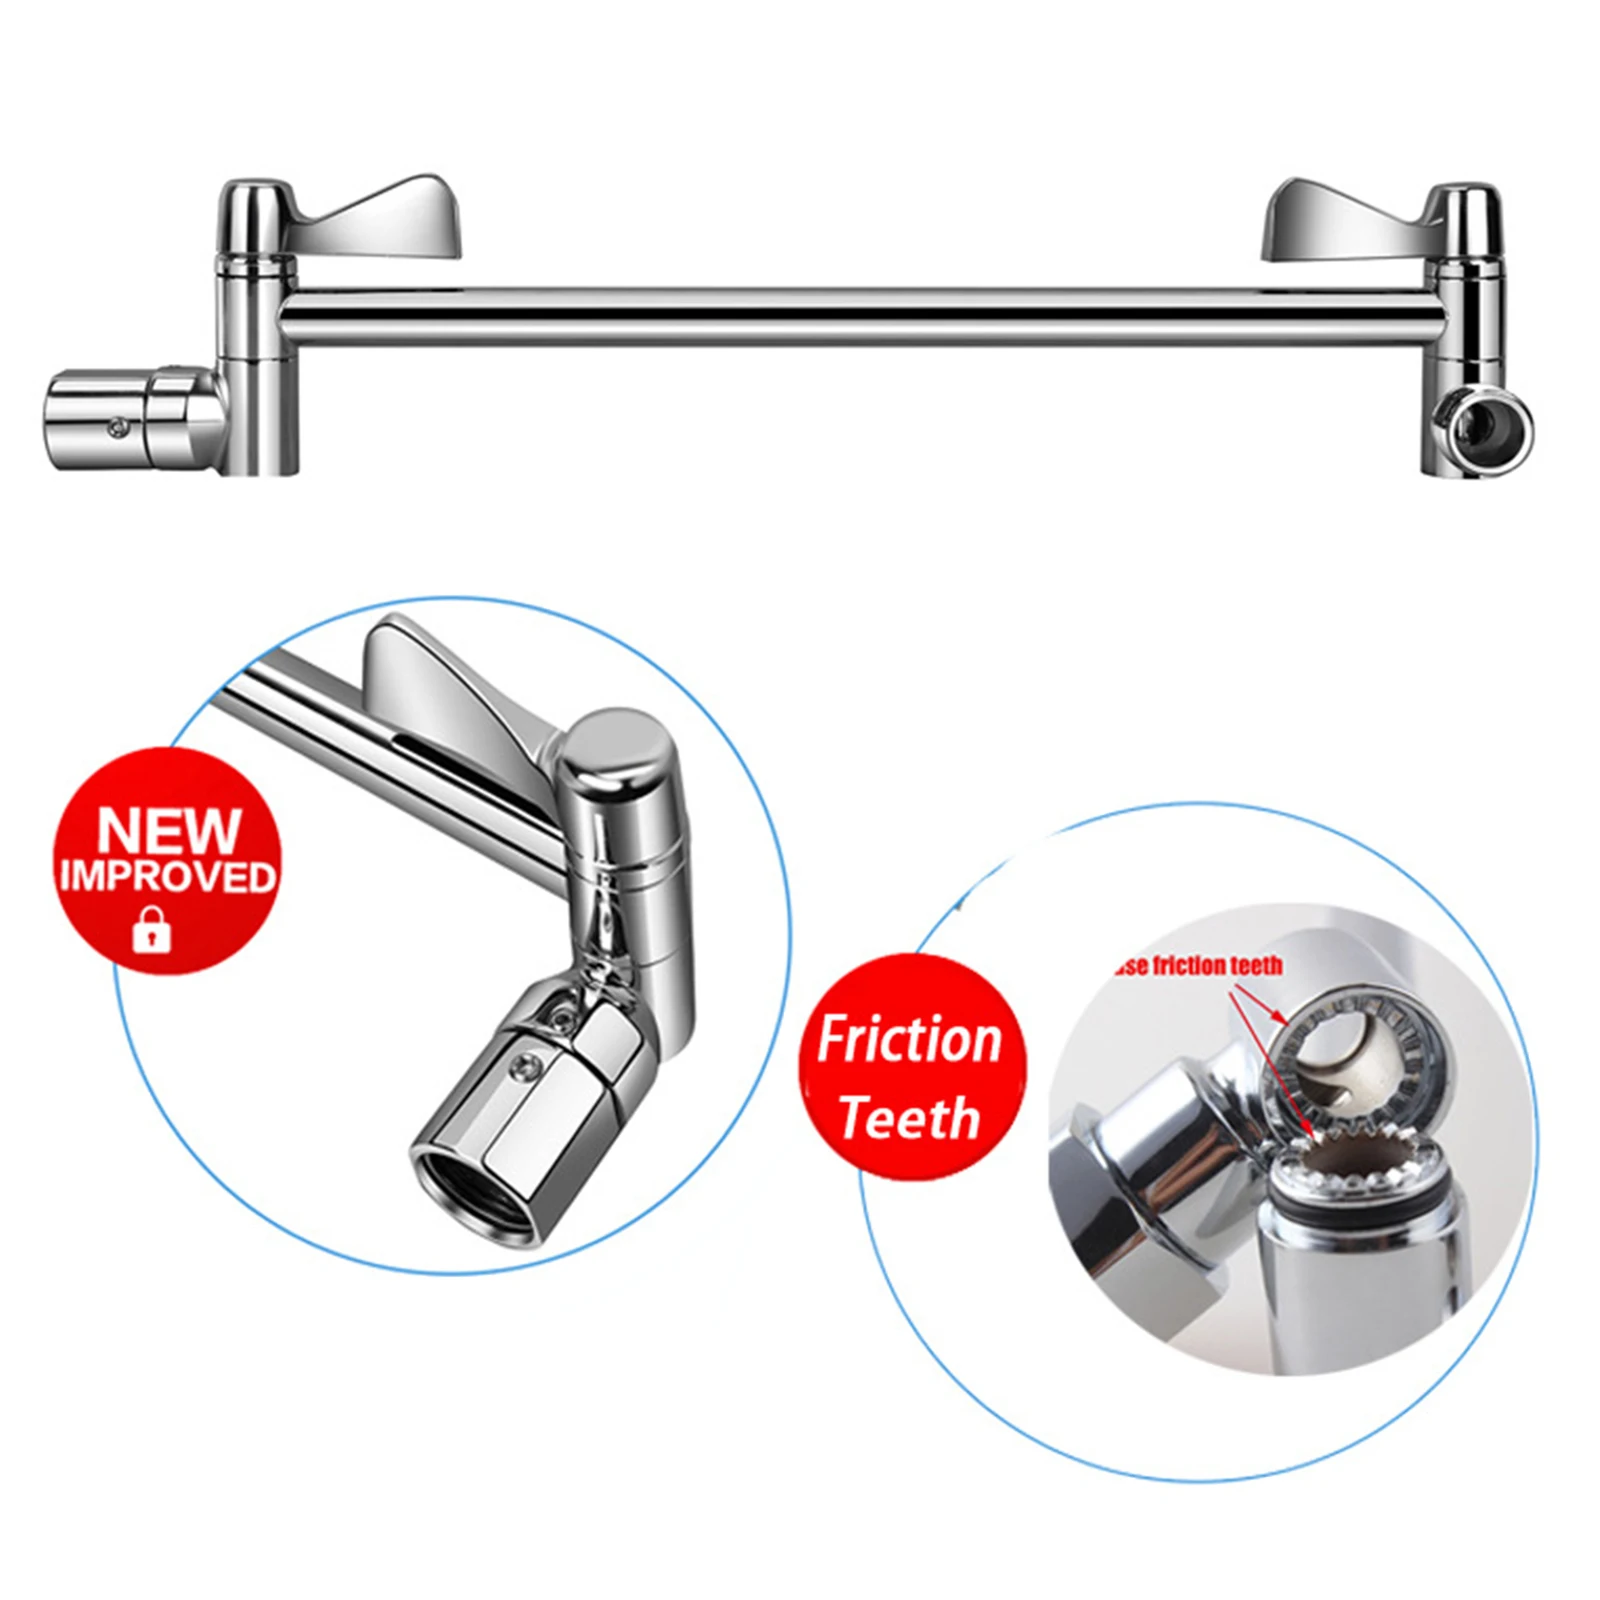 Shower Head Spray Connection,Adjustable Elbow Shower Arm Bracket,With Tooth,Big Handle Extension Rod